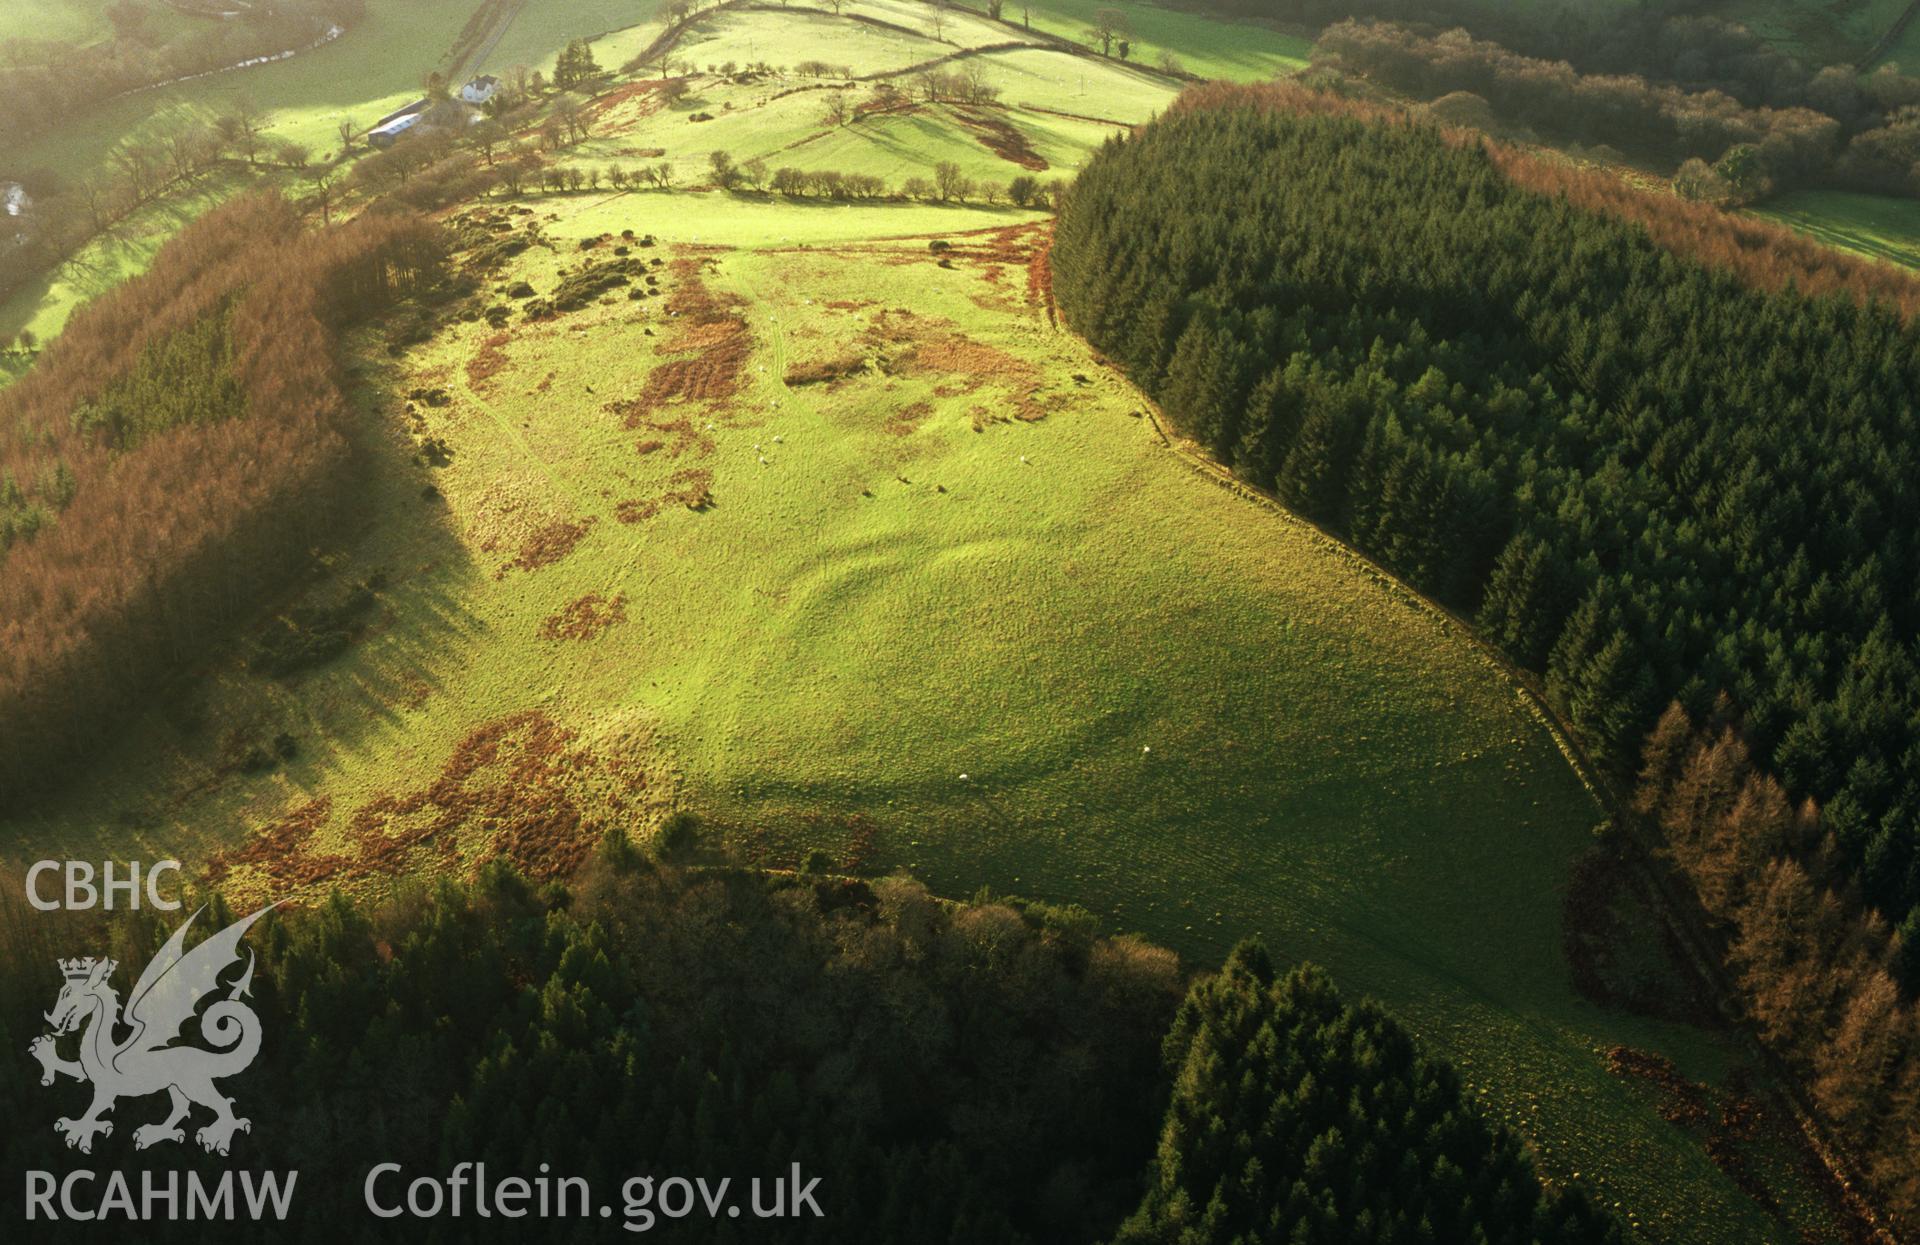 RCAHMW colour slide aerial photograph of Allt Aber-Mangoed, defended enclosure, stereo colour (left eye). Taken by Toby Driver on 05/12/2002